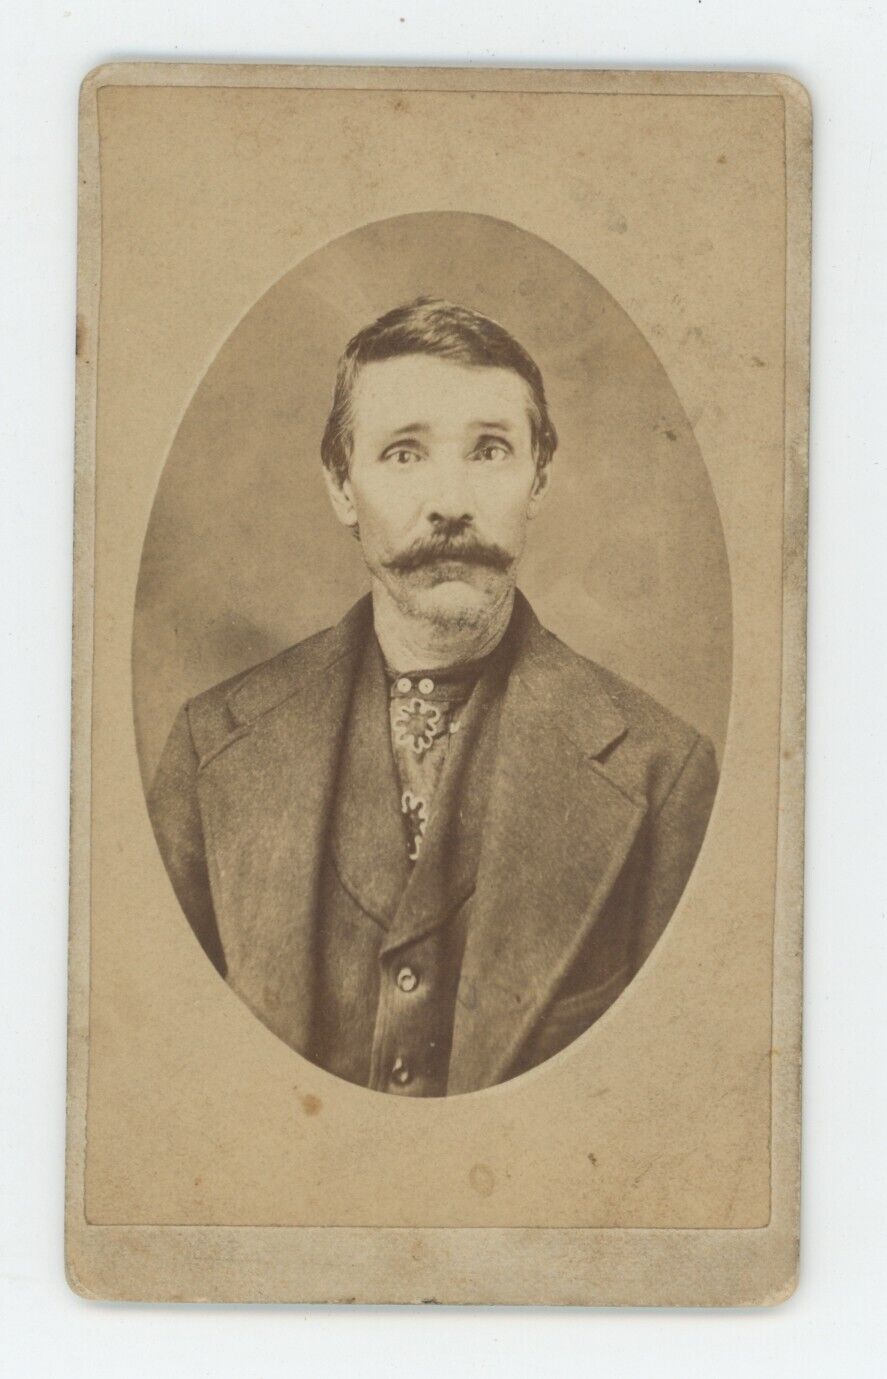 Antique CDV c1870s Handsome Rugged Man With Large Mustache Wearing Suit & Tie